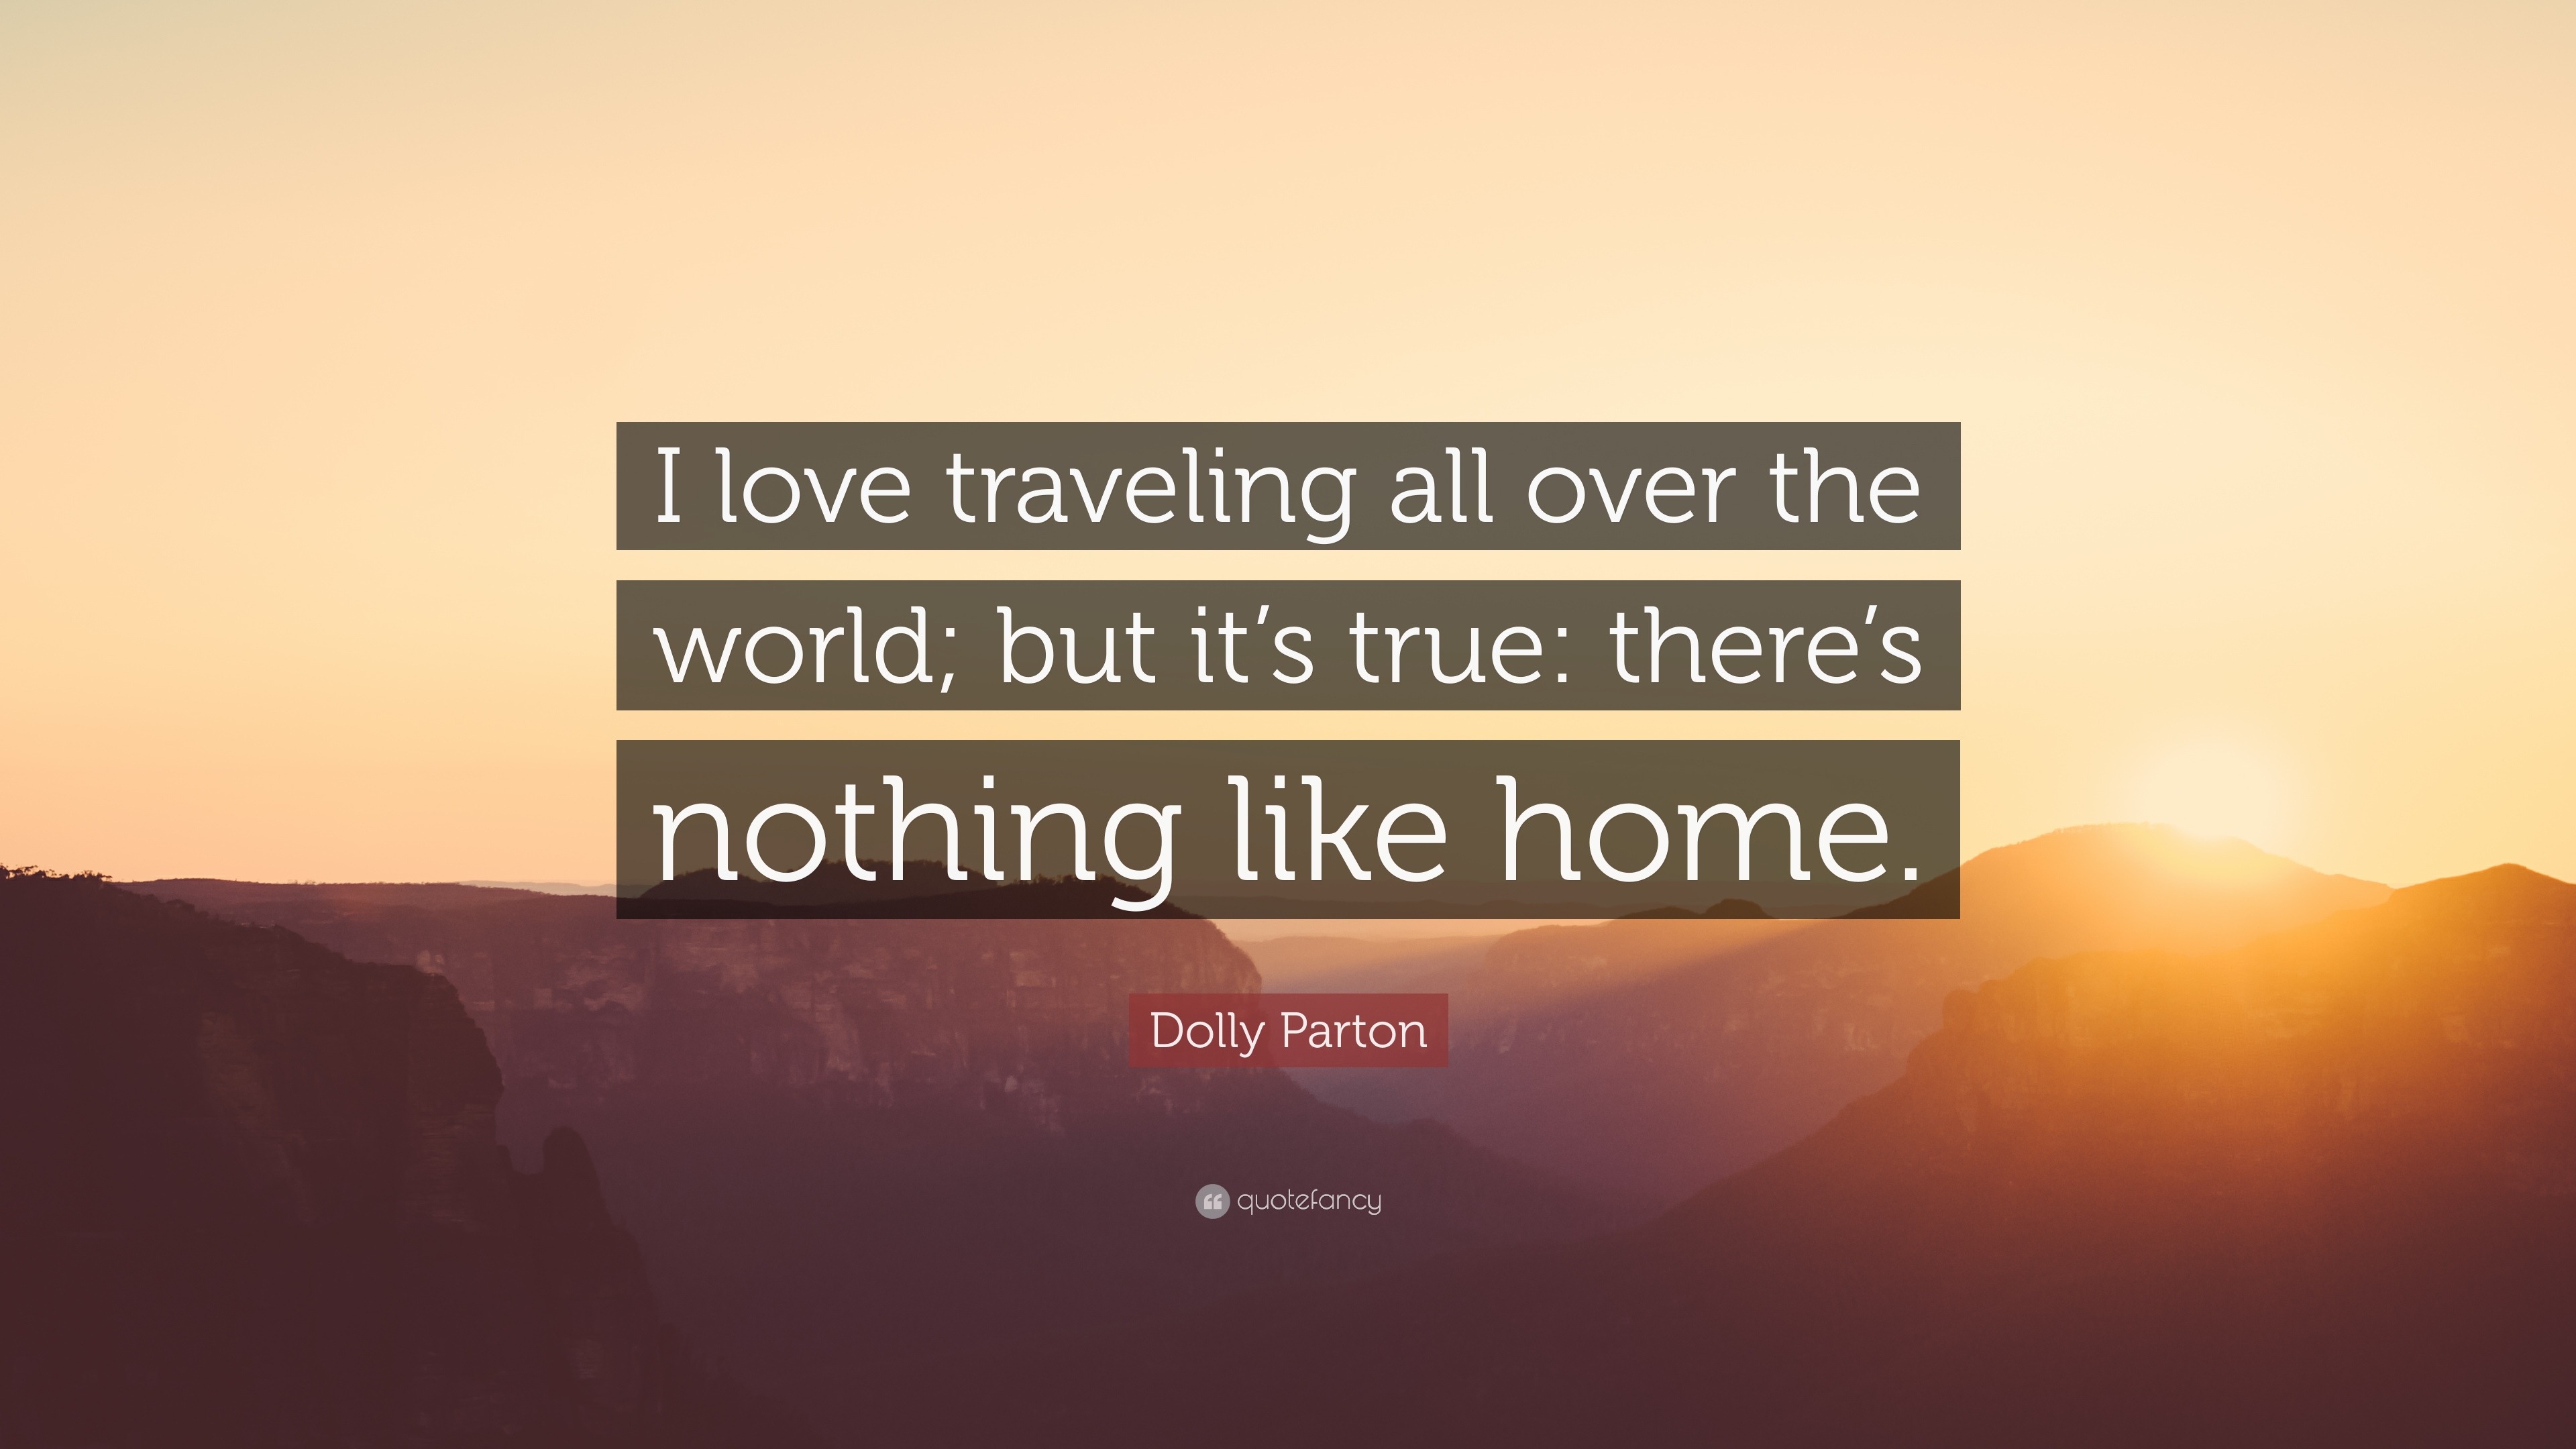 Dolly Parton Quote “I love traveling all over the world but it s true